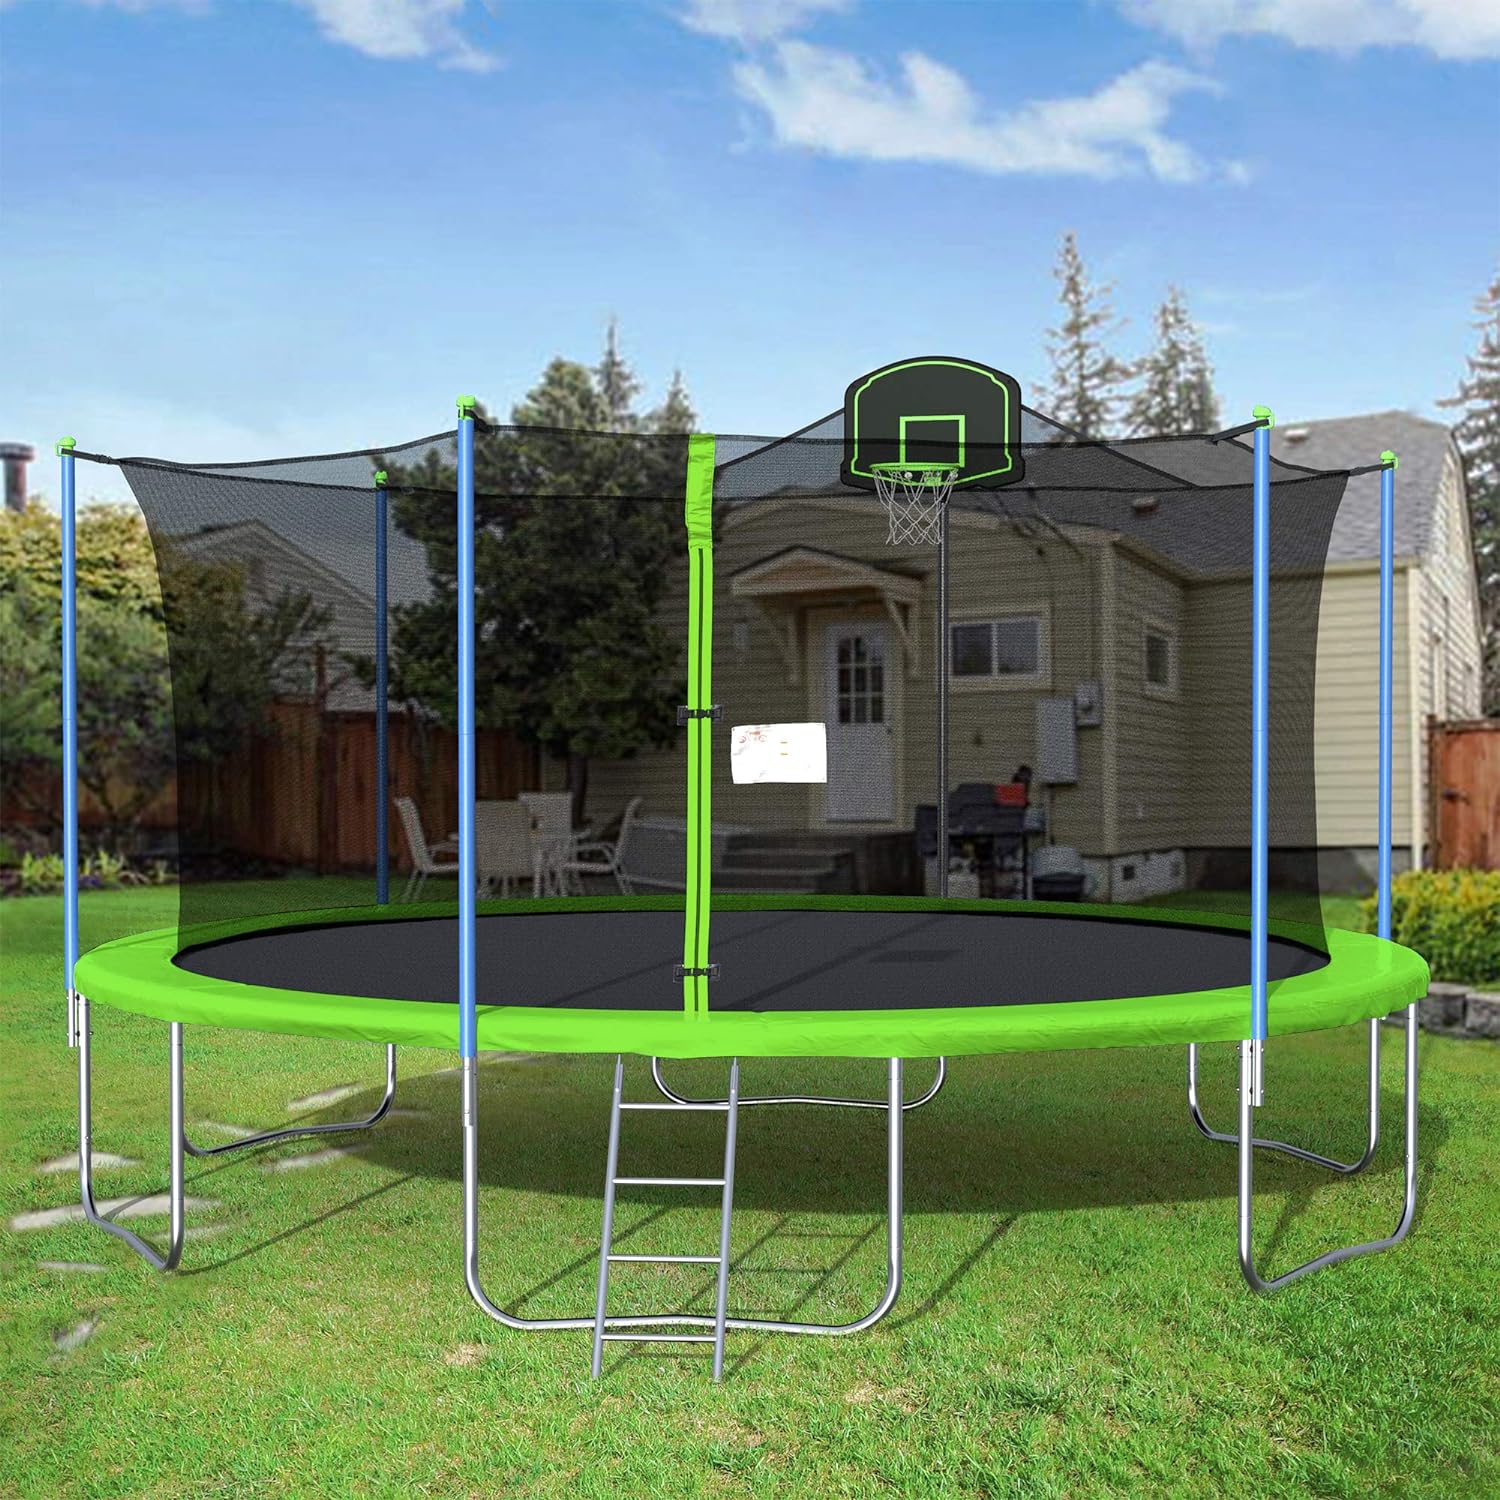 DHHU Trampoline for Adults 16ft Trampoline with Enclosure Net Basketball Hoop and Ladder